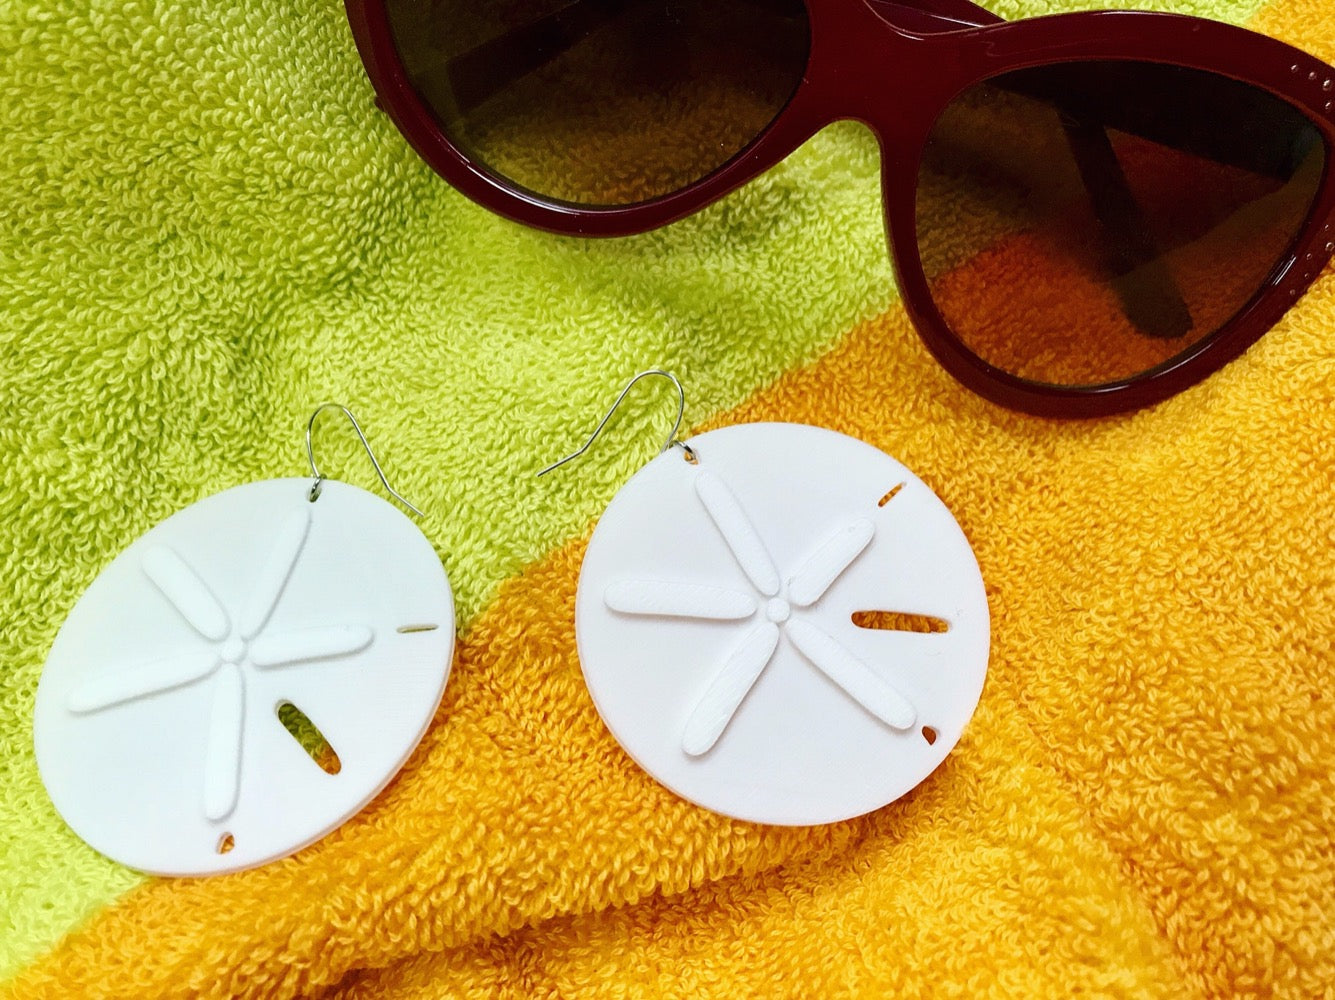 Laying on a beach towel and next to sunglasses are two white earrings shaped like sand dollars or silver dollars that have washed onto shore. 